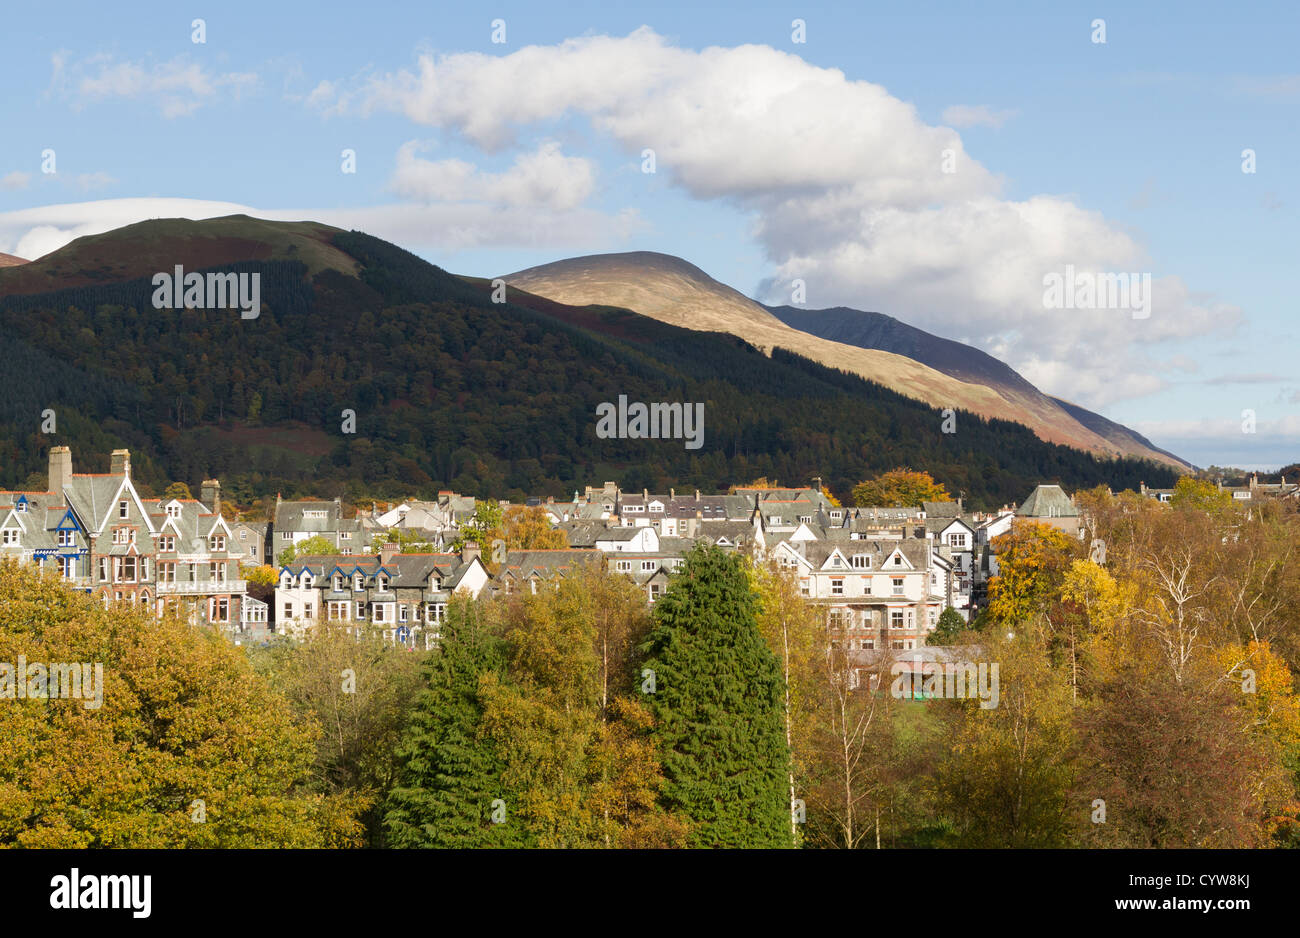 Hotels and guest houses in Keswick Cumbria Stock Photo